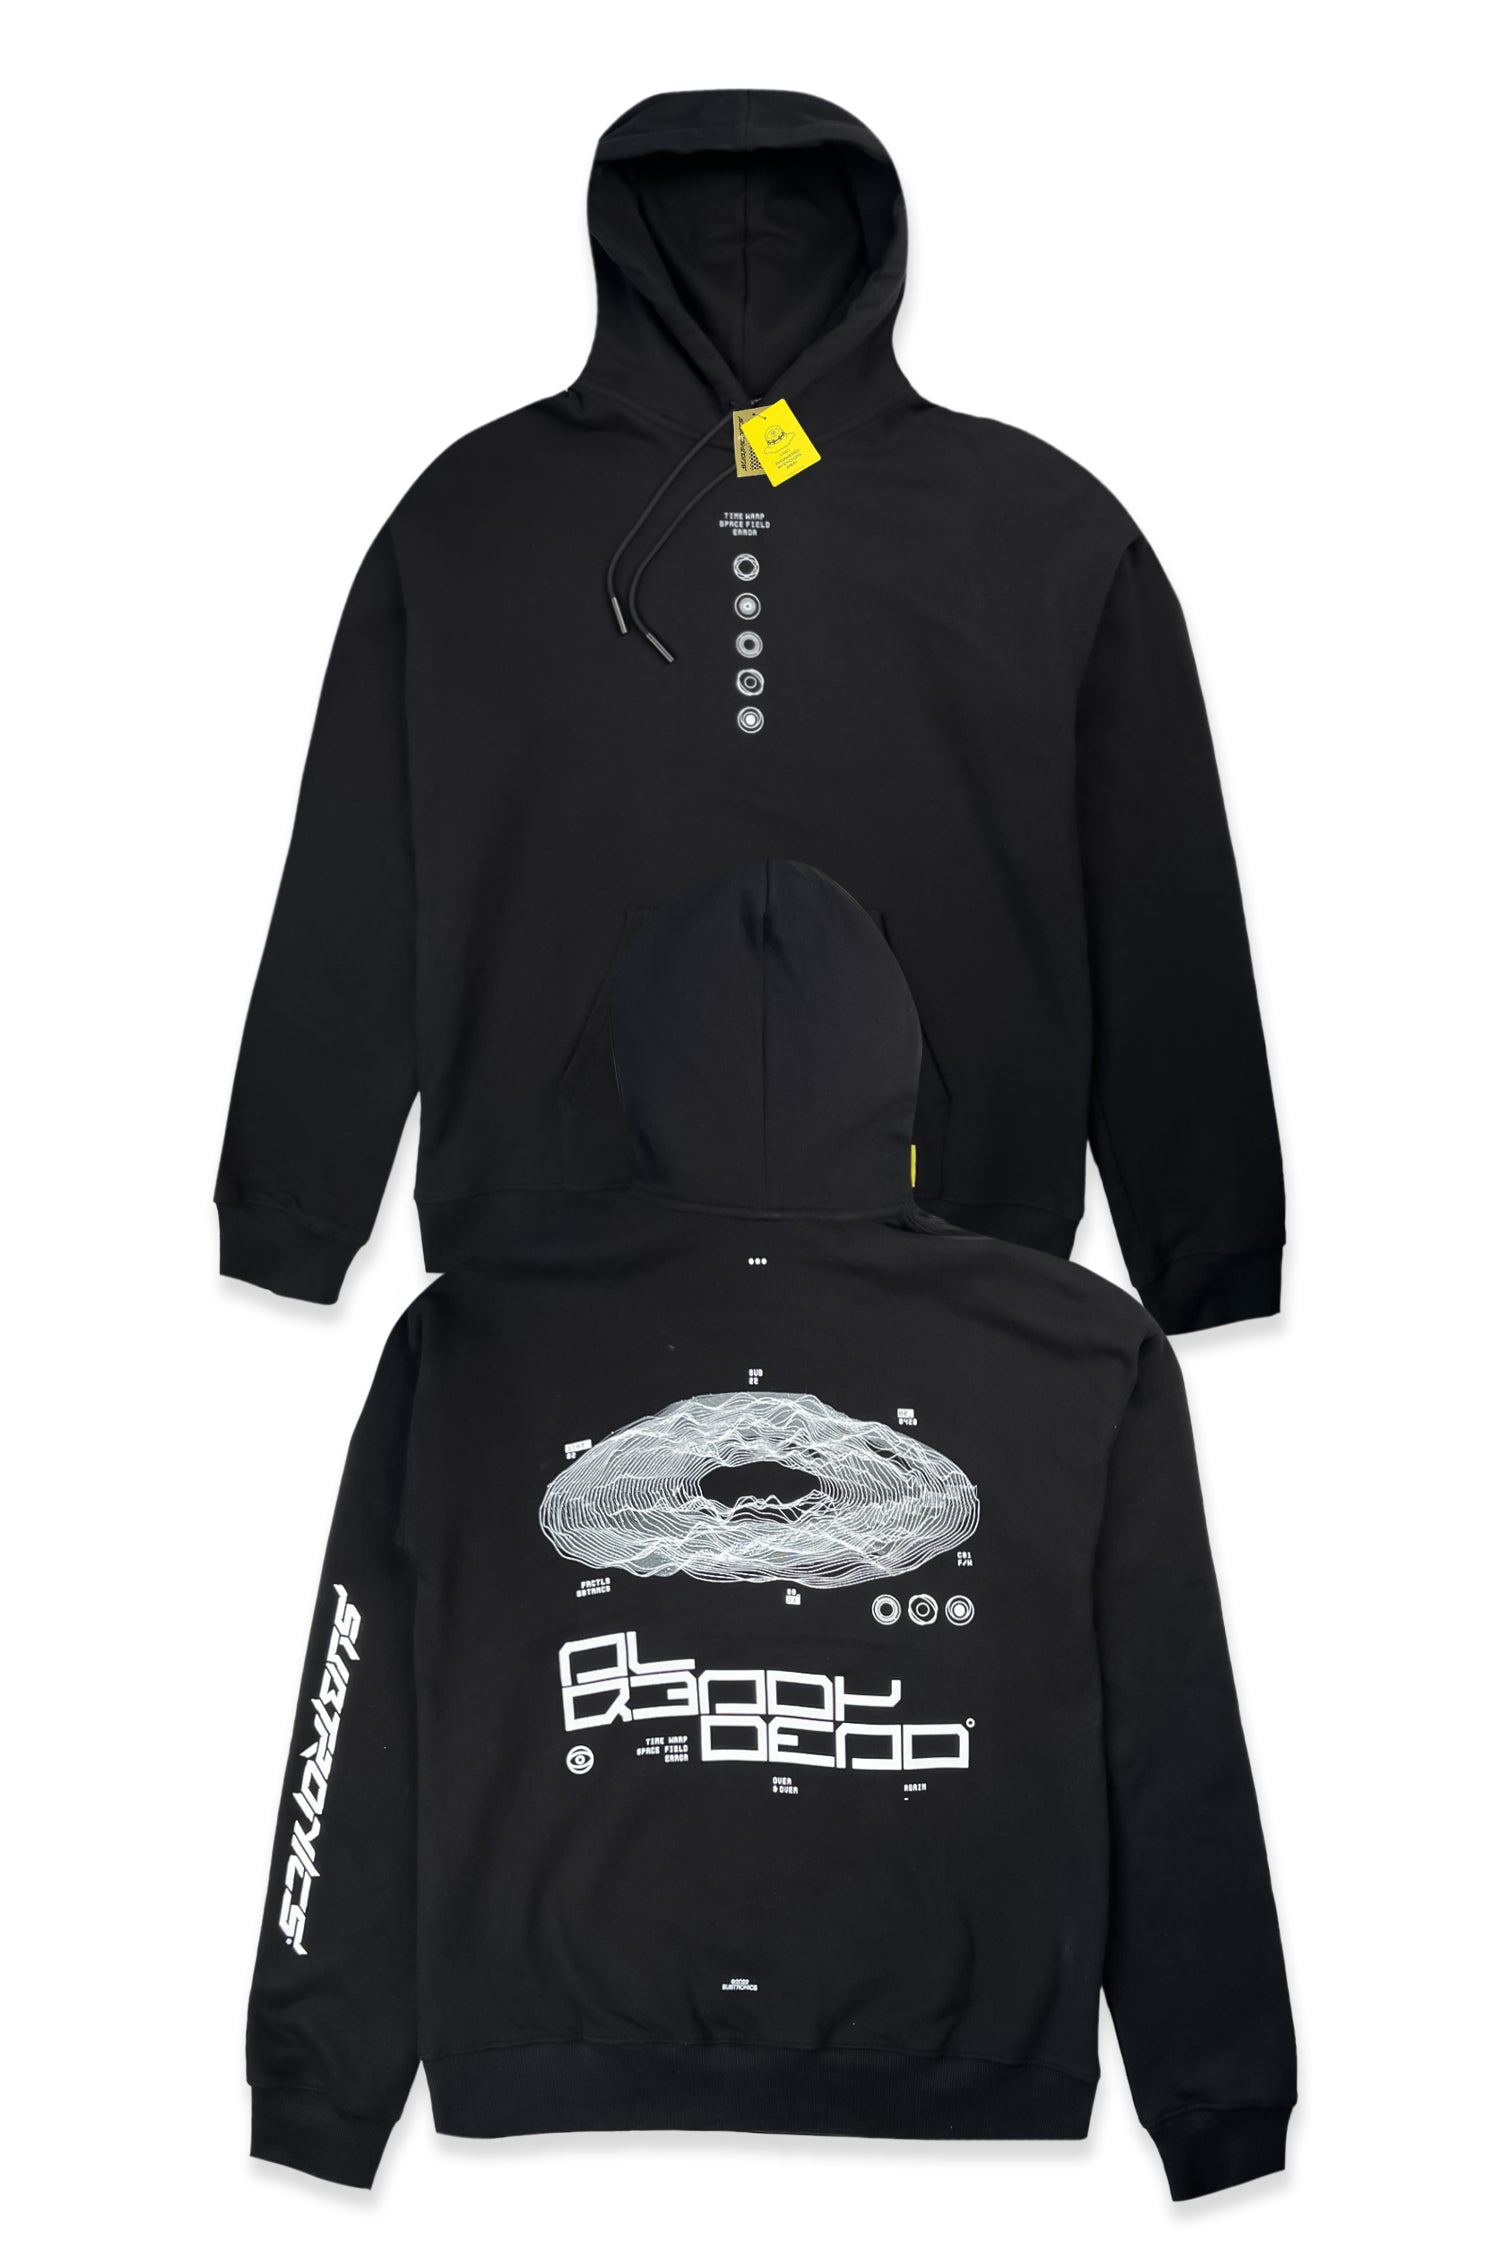 Subtronics Signature Collection - Space Field Hoodie